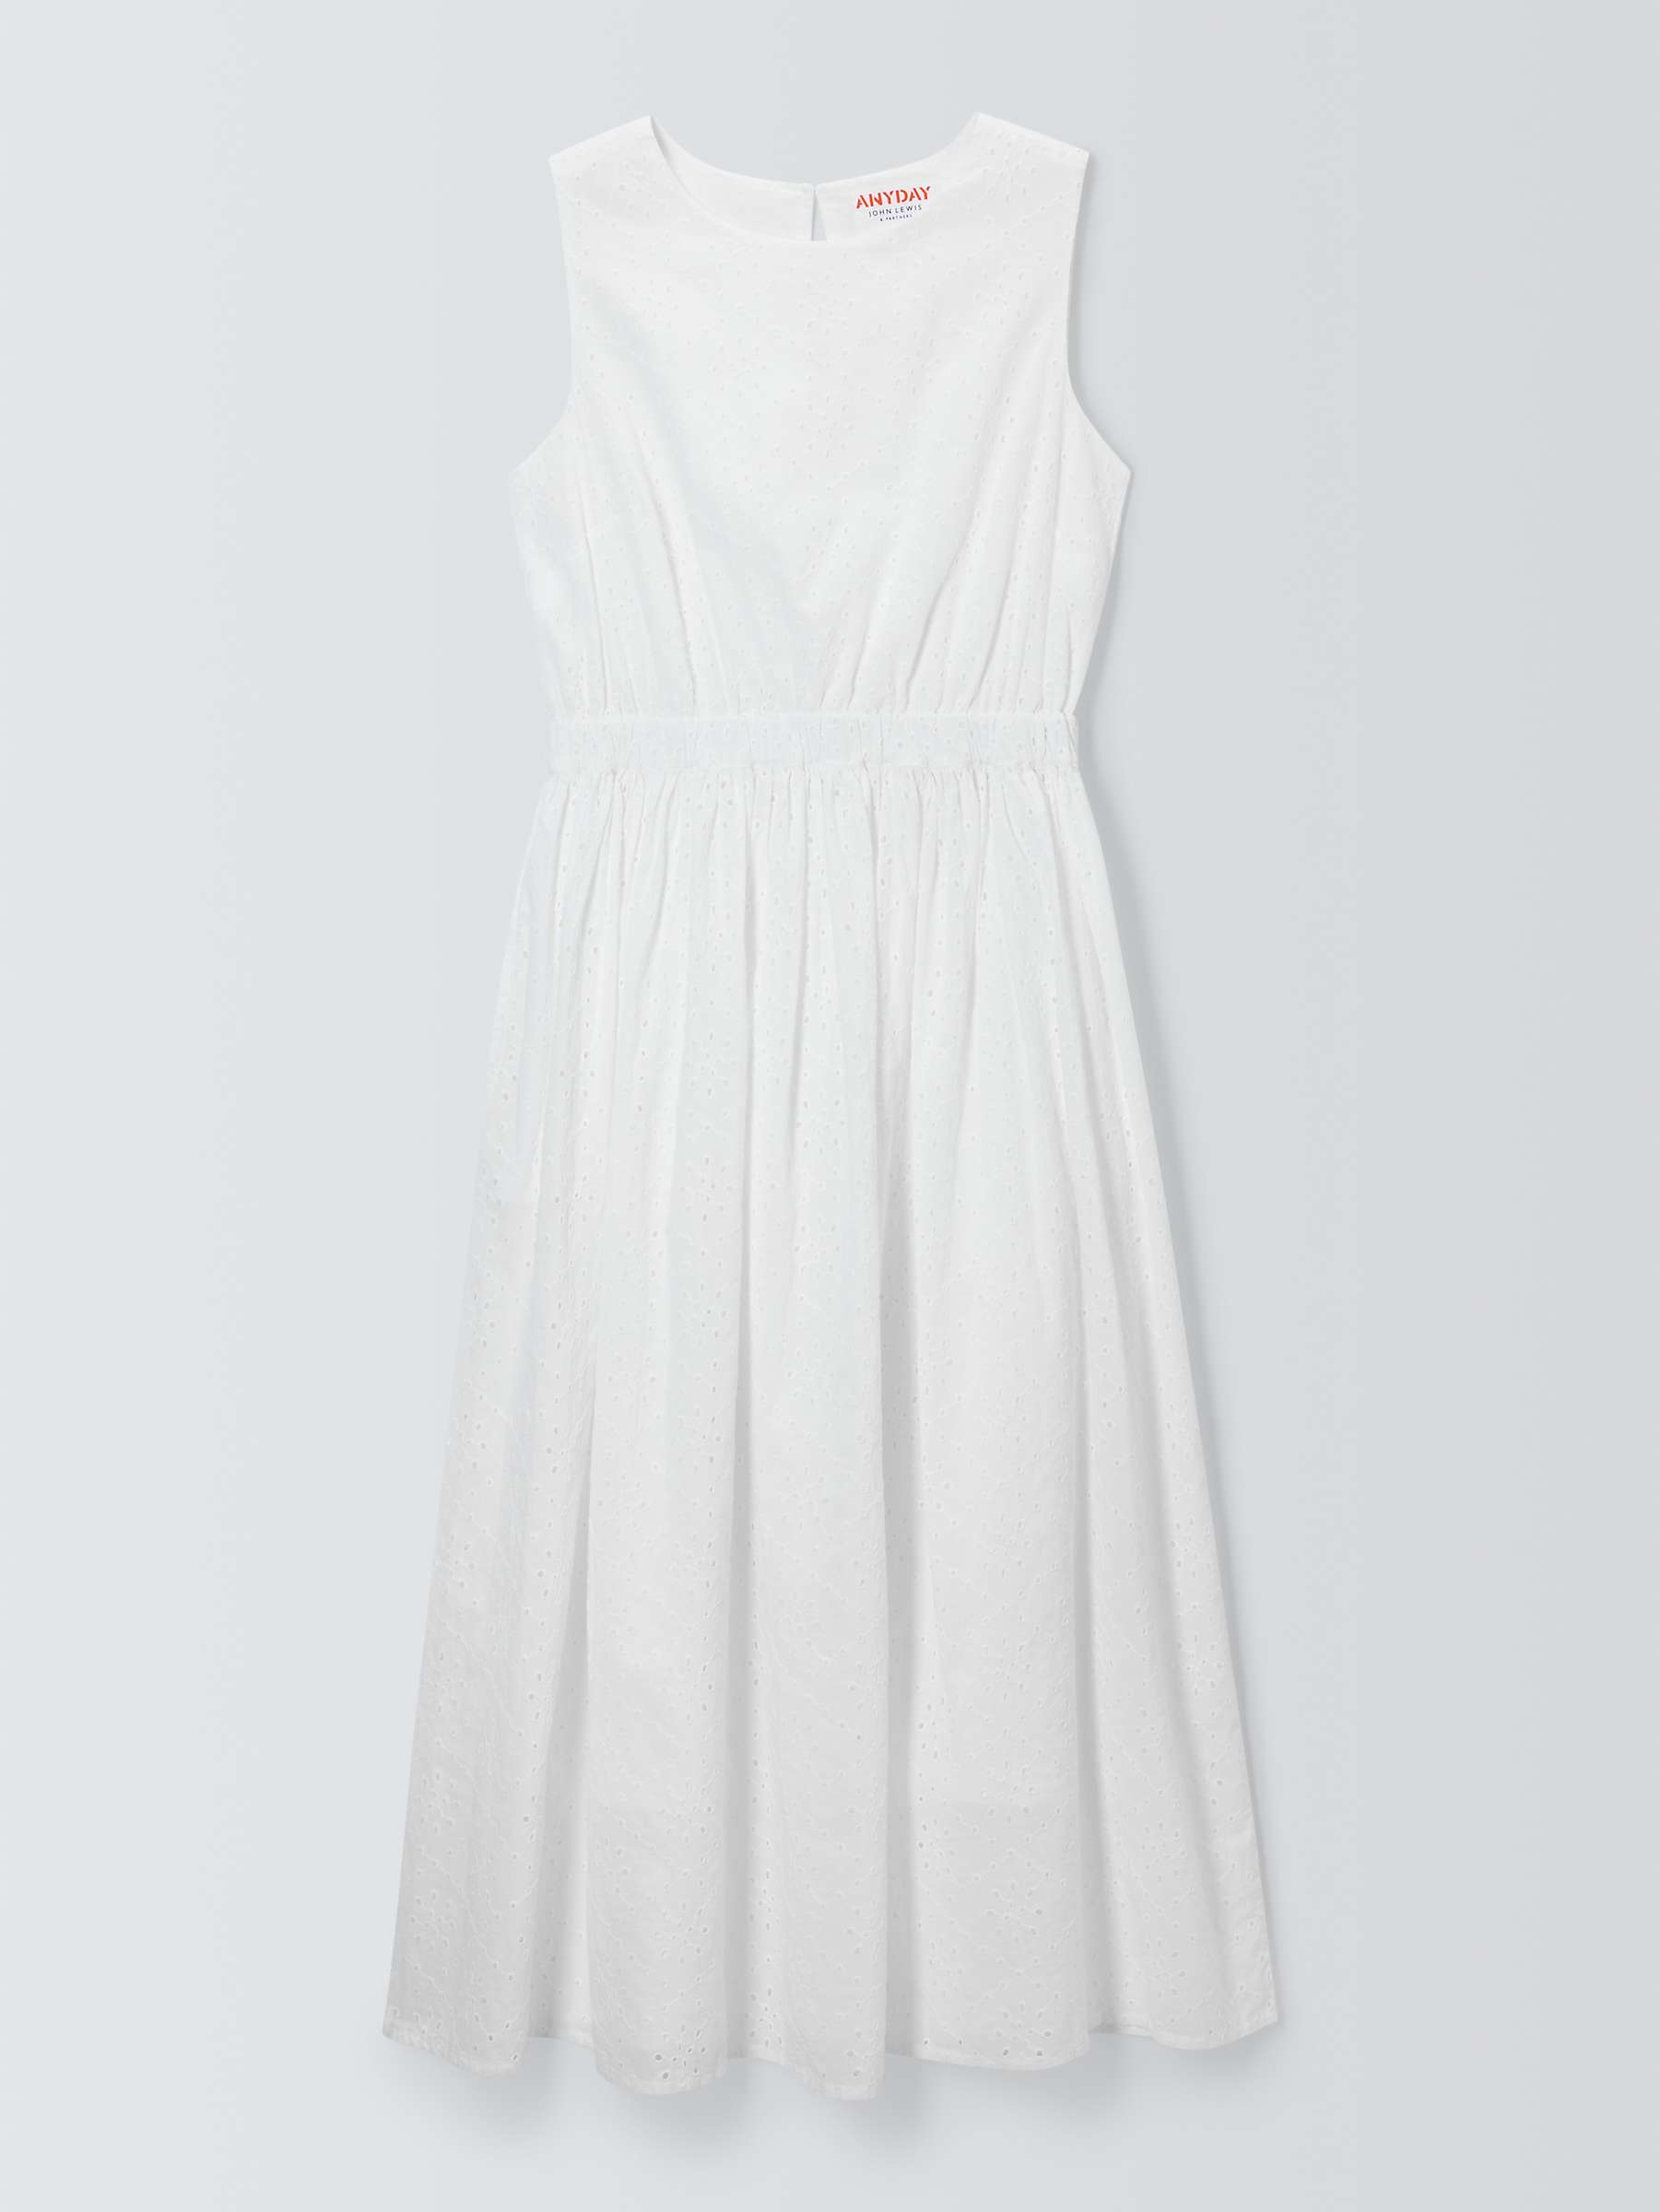 Buy John Lewis ANYDAY Broderie Dress, White Online at johnlewis.com